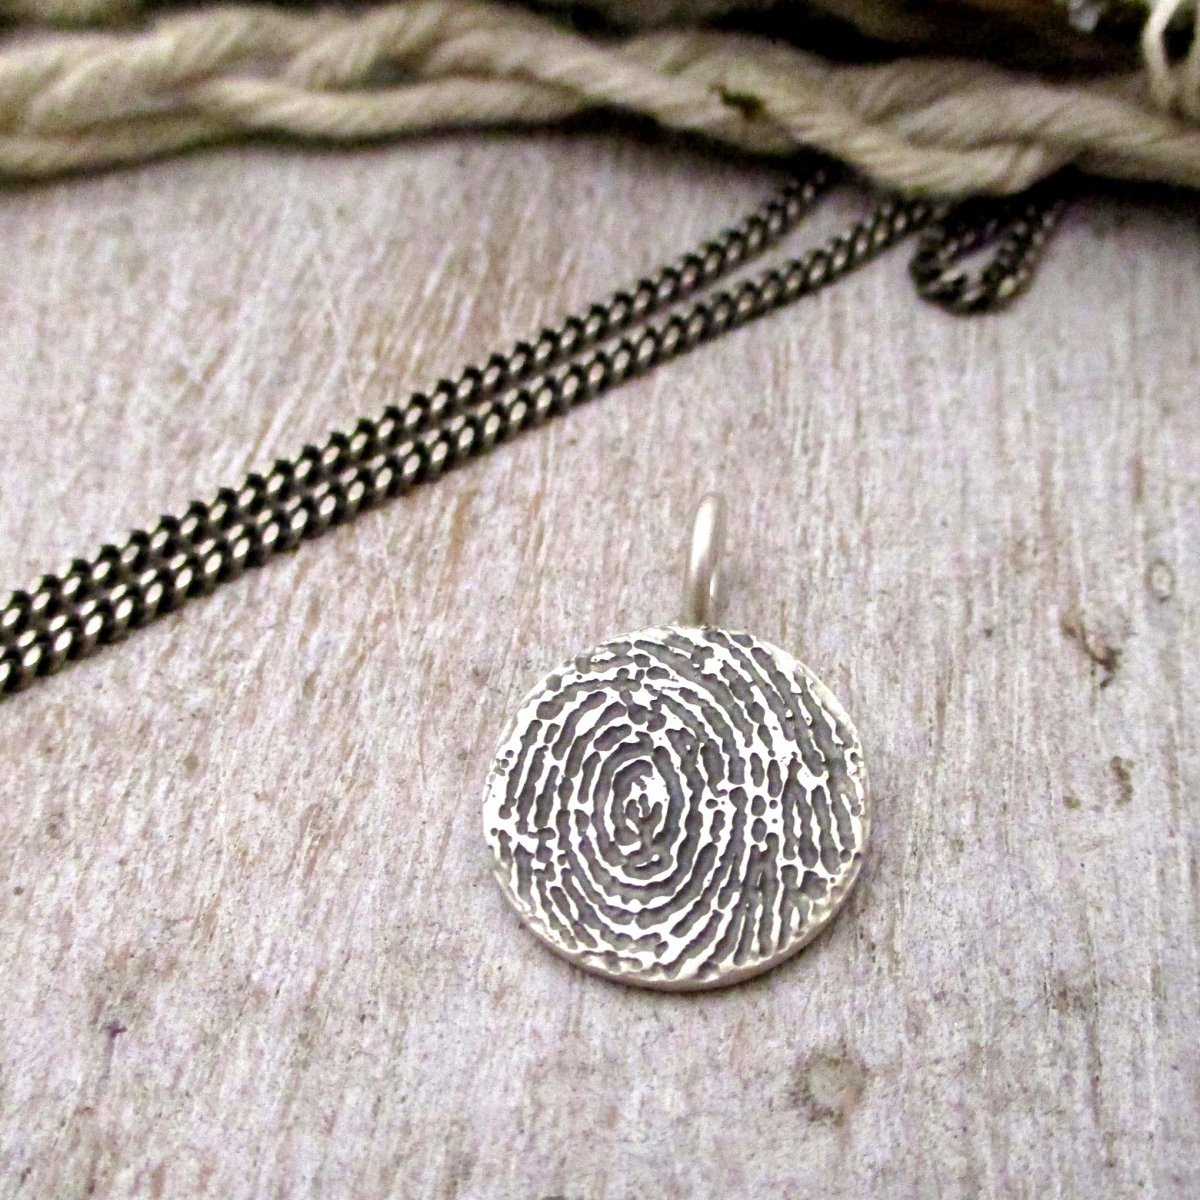 Oxidized Silver Fingerprint Circle Pendant from Flat Ink Print - Luxe Design Jewellery